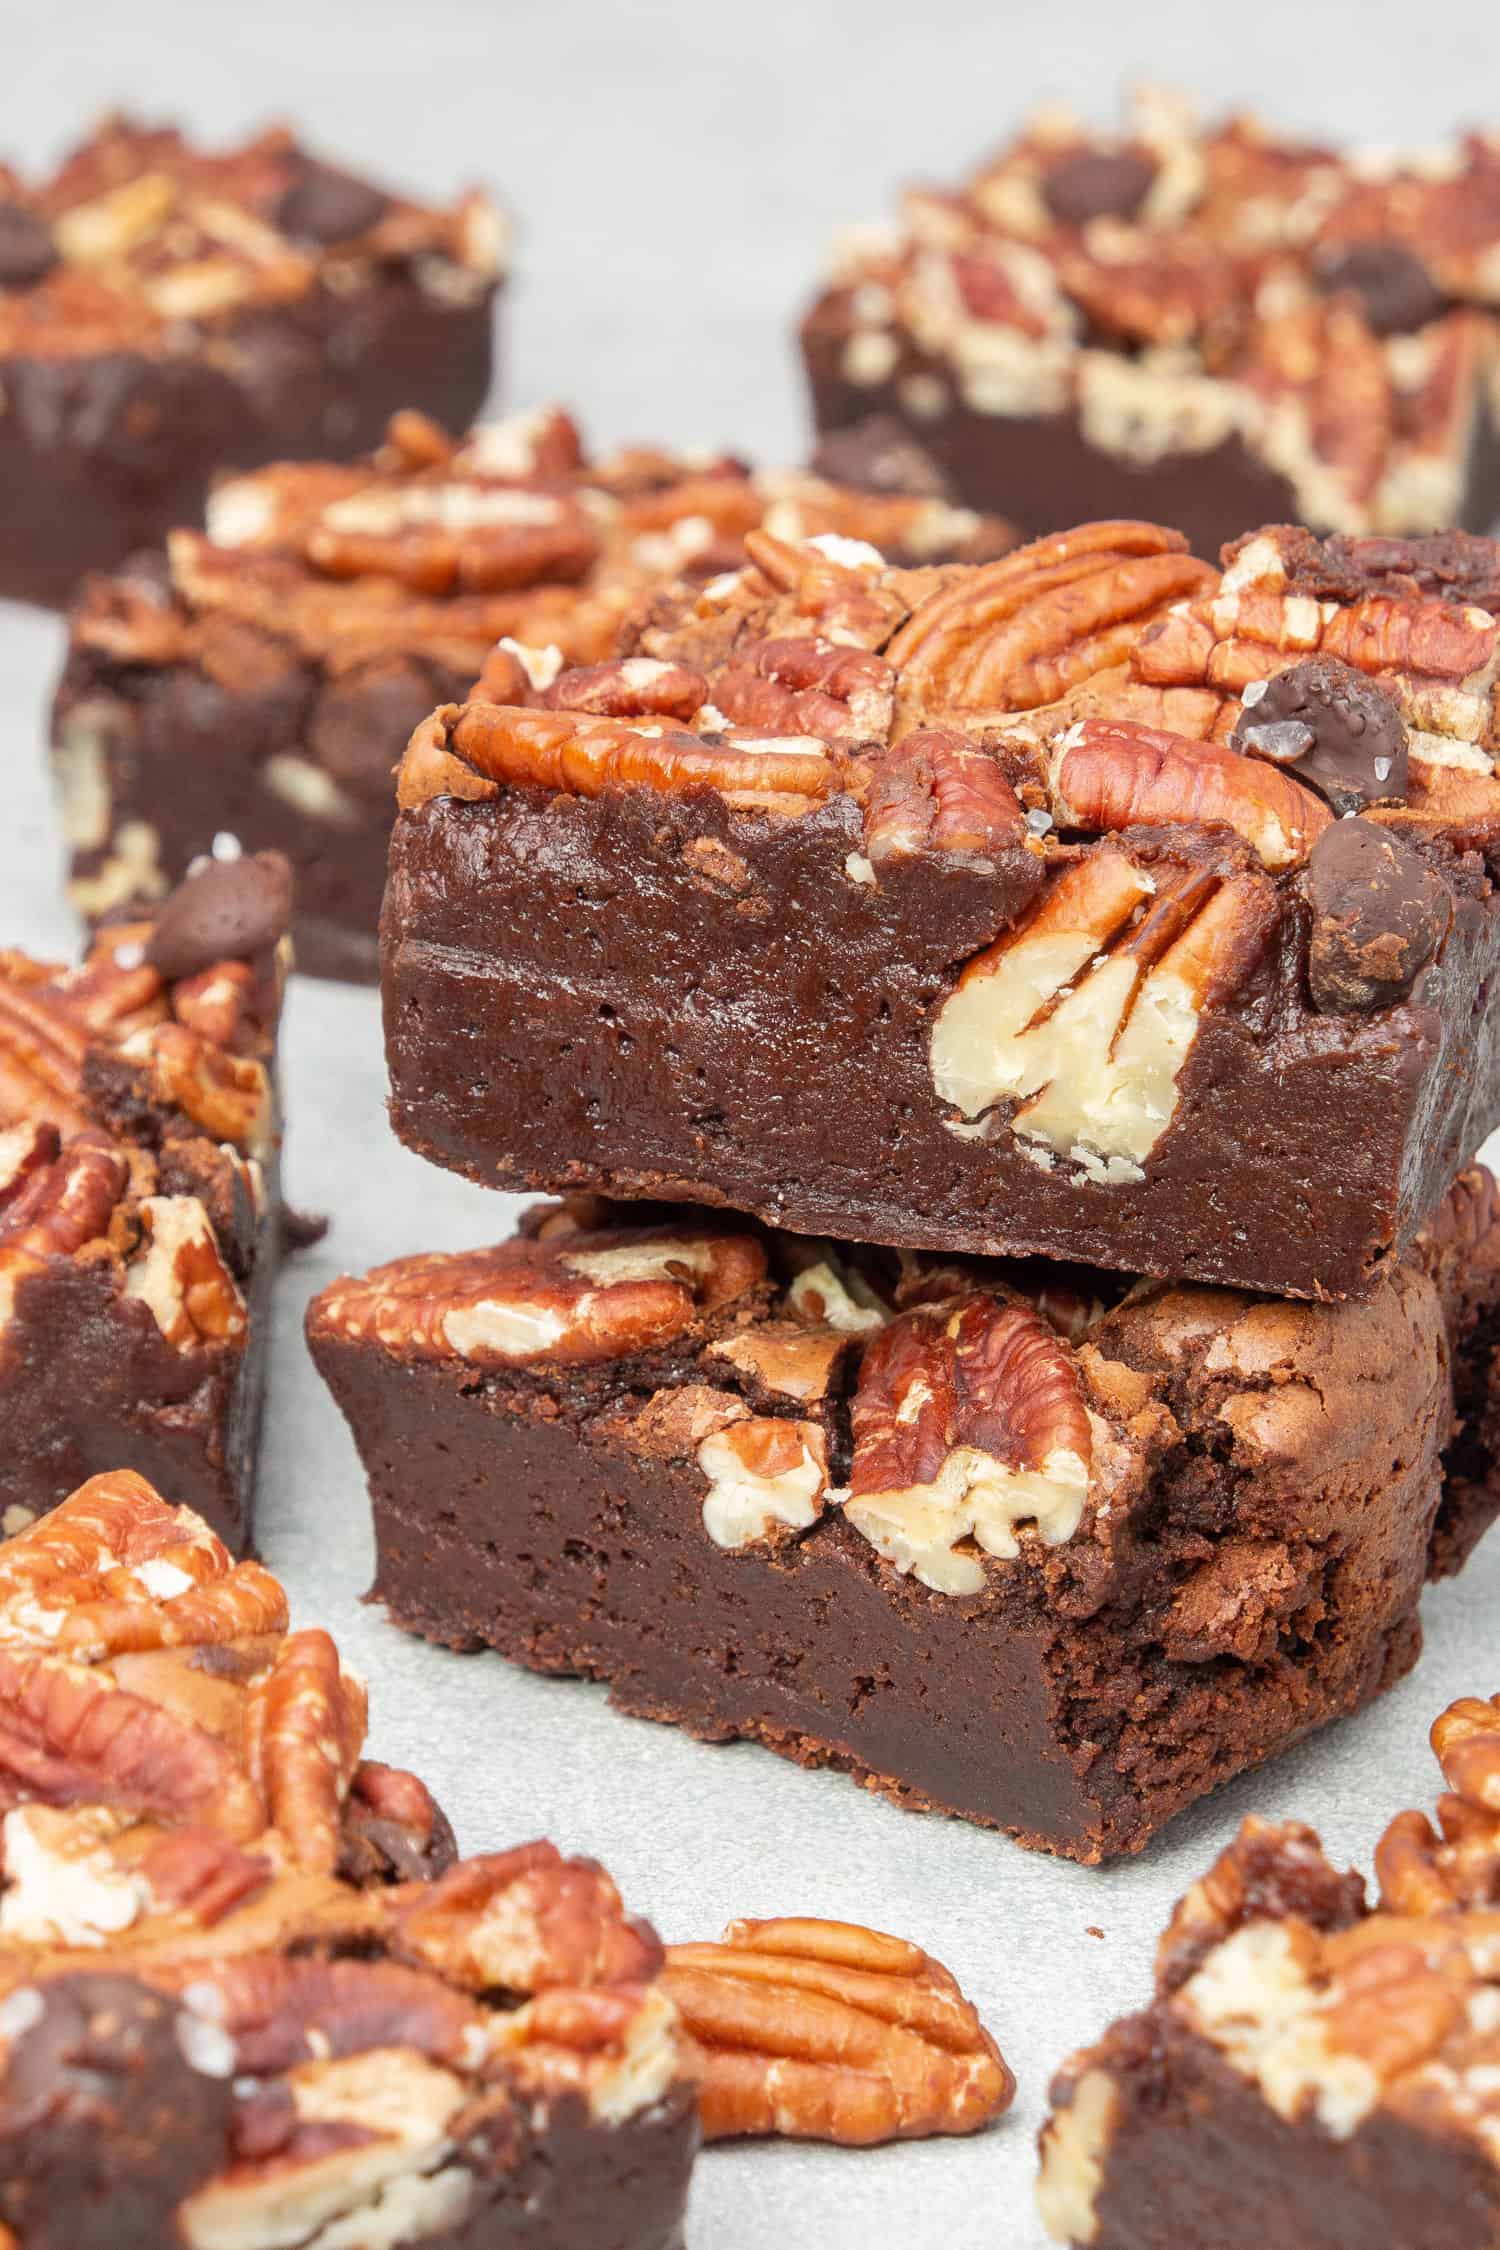 2 Pecan brownies on each others, and surrounded with other brownies.